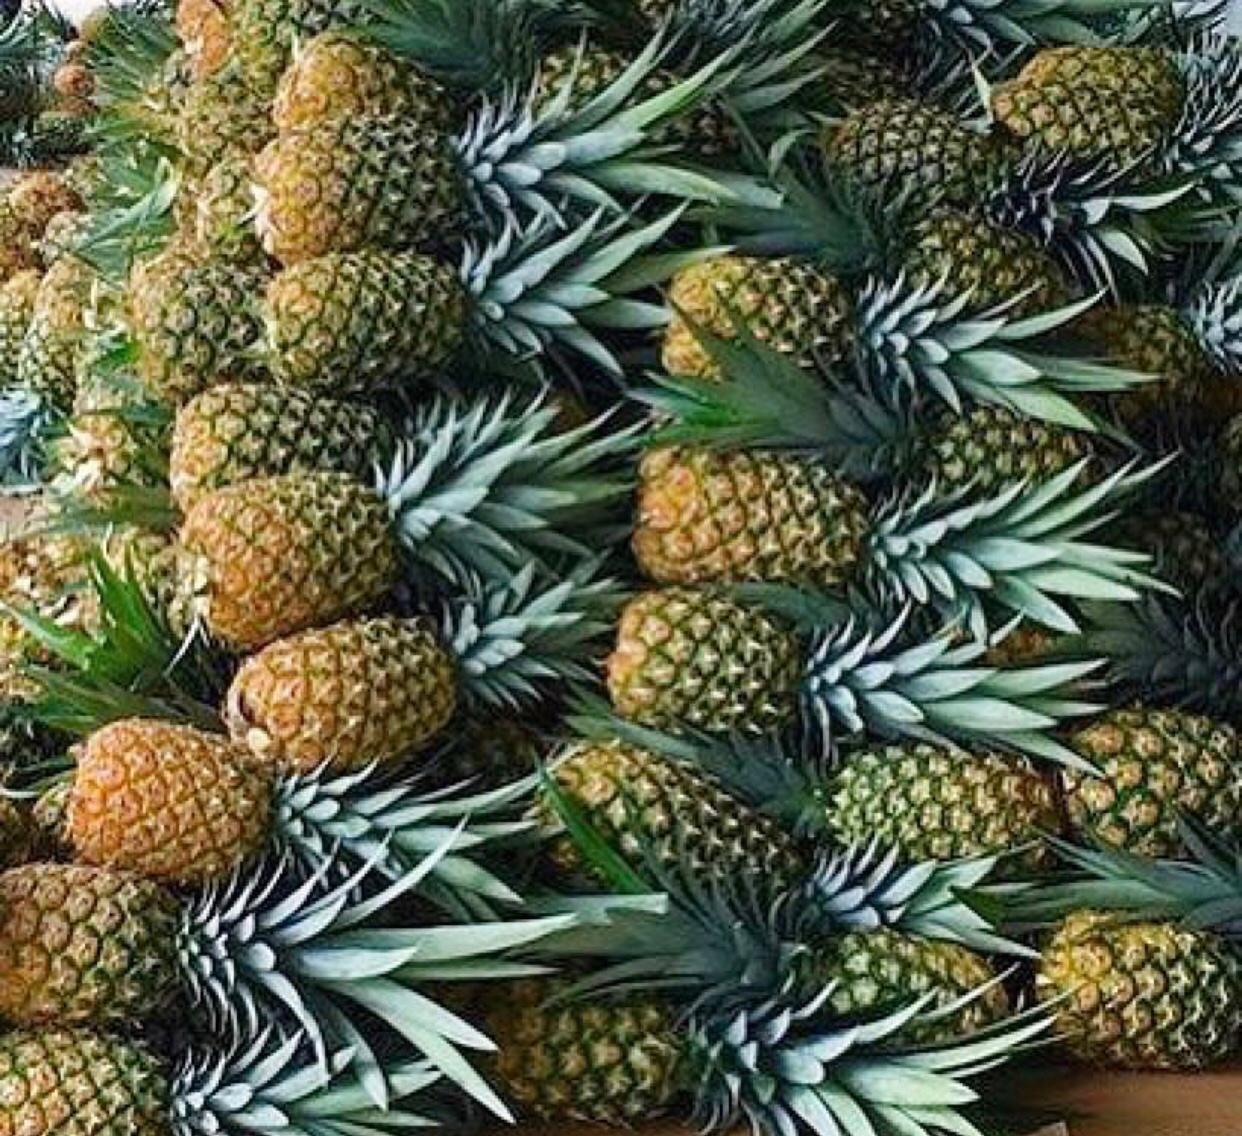 Certified Quality Organic Pineapples suitable for Export